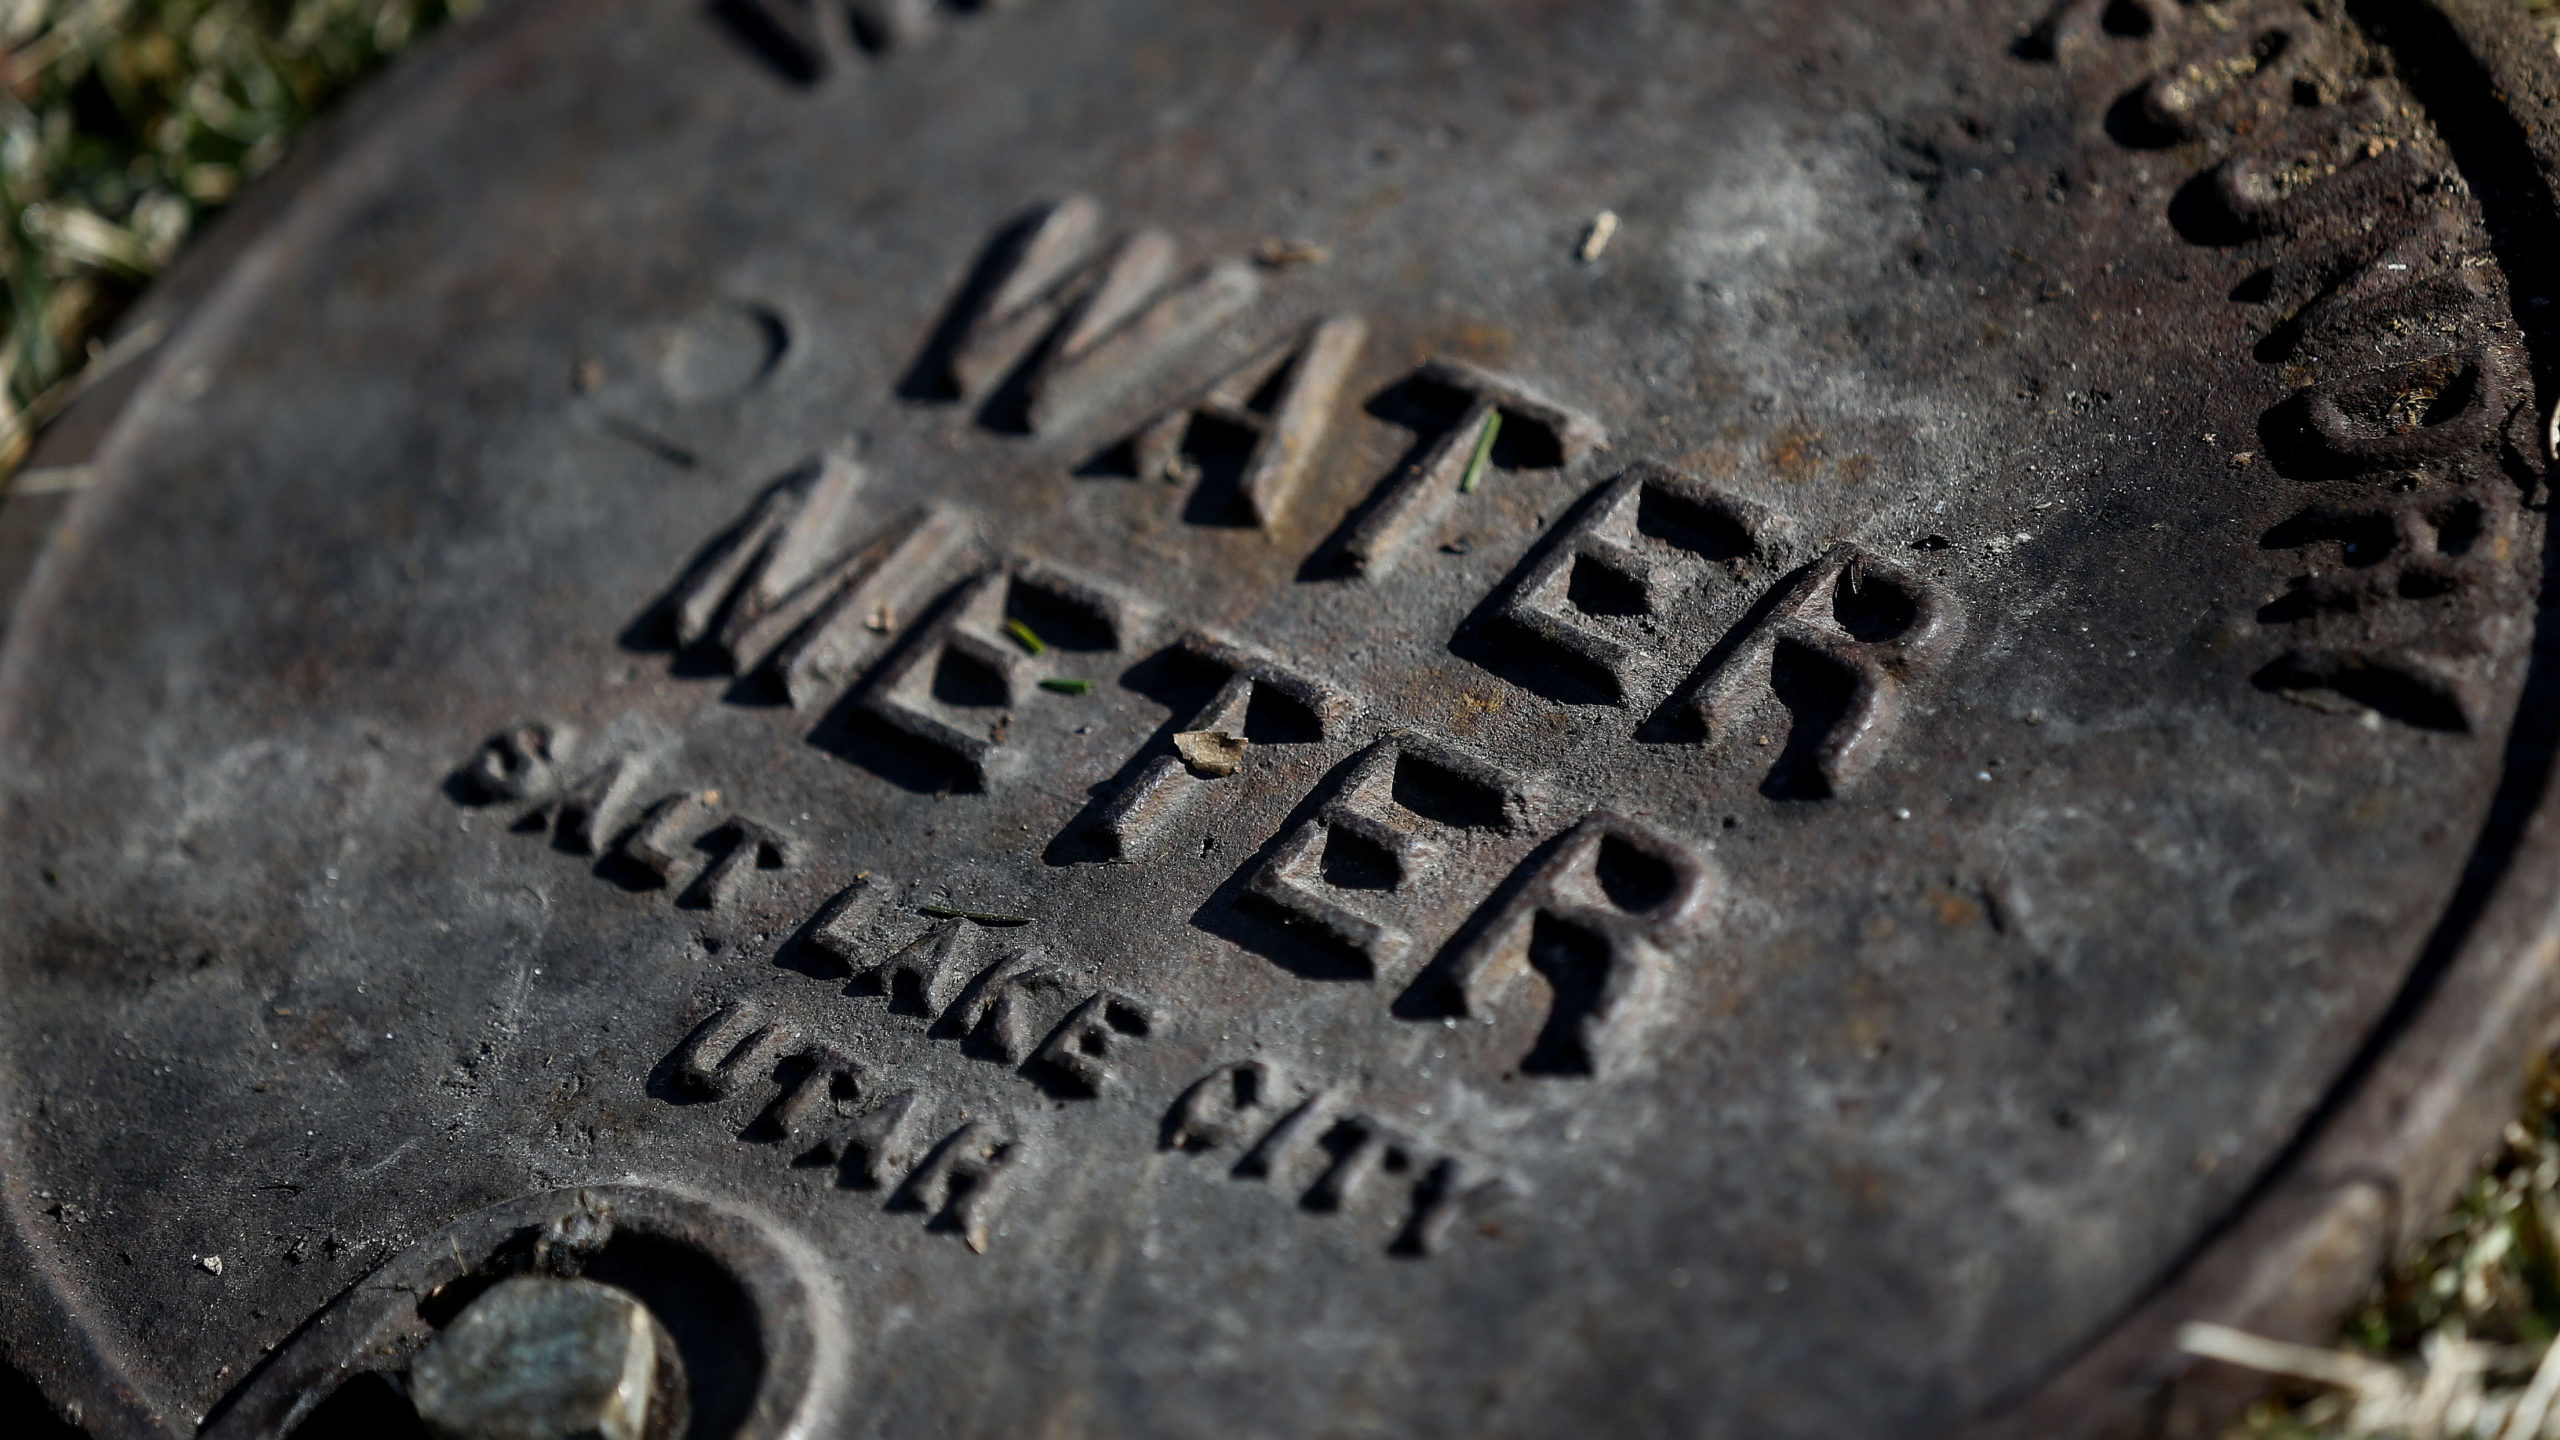 Water meter cover is shown, secondary water metering will take effect in 2030...